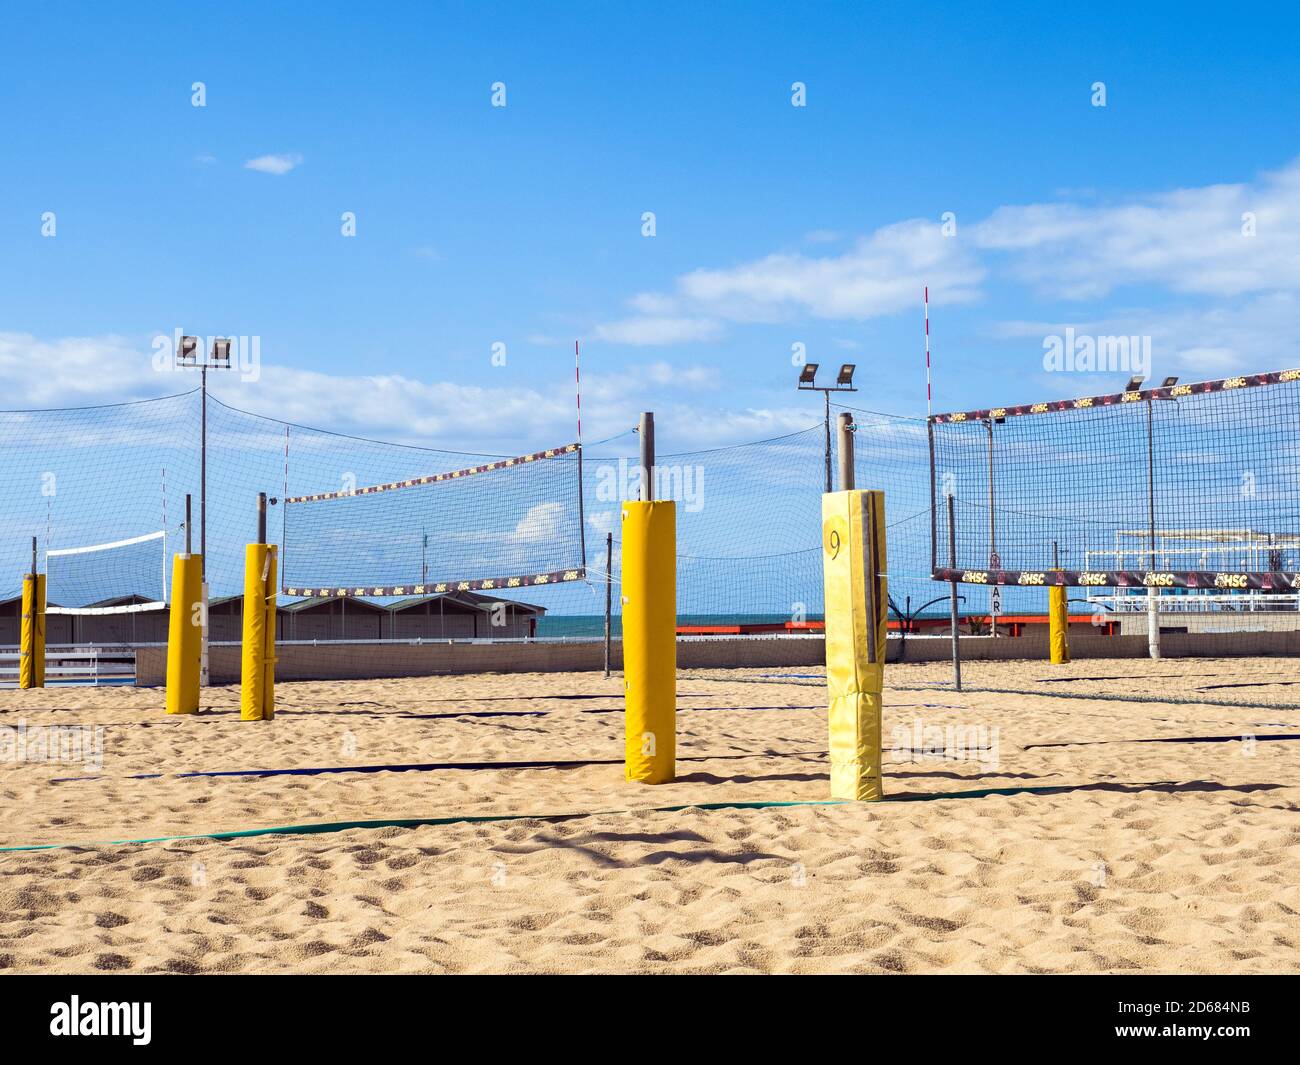 Beach volley field of a bathing resort in Ostia Lido - Rome, Italy Stock Photo